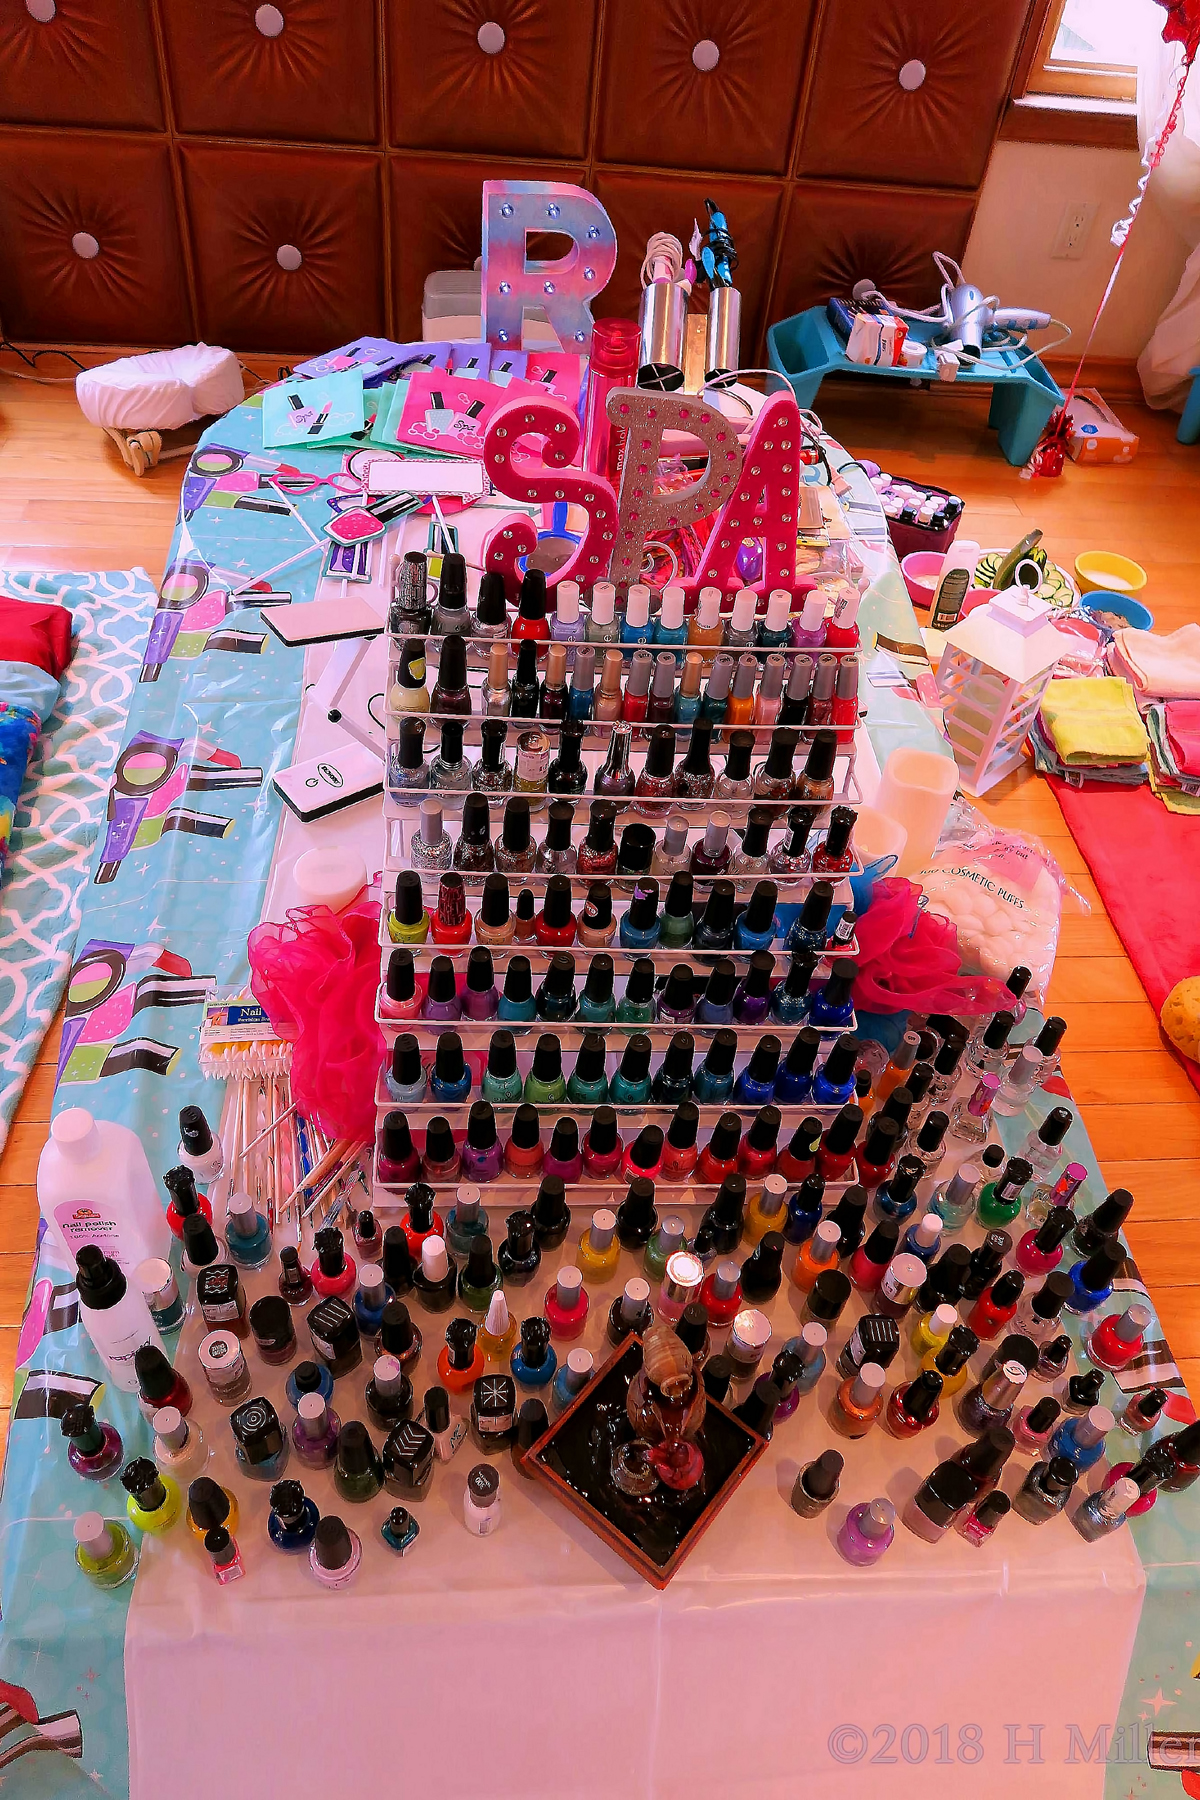 Perfect Kids Salon Manicure Setup For The Party Guests! 